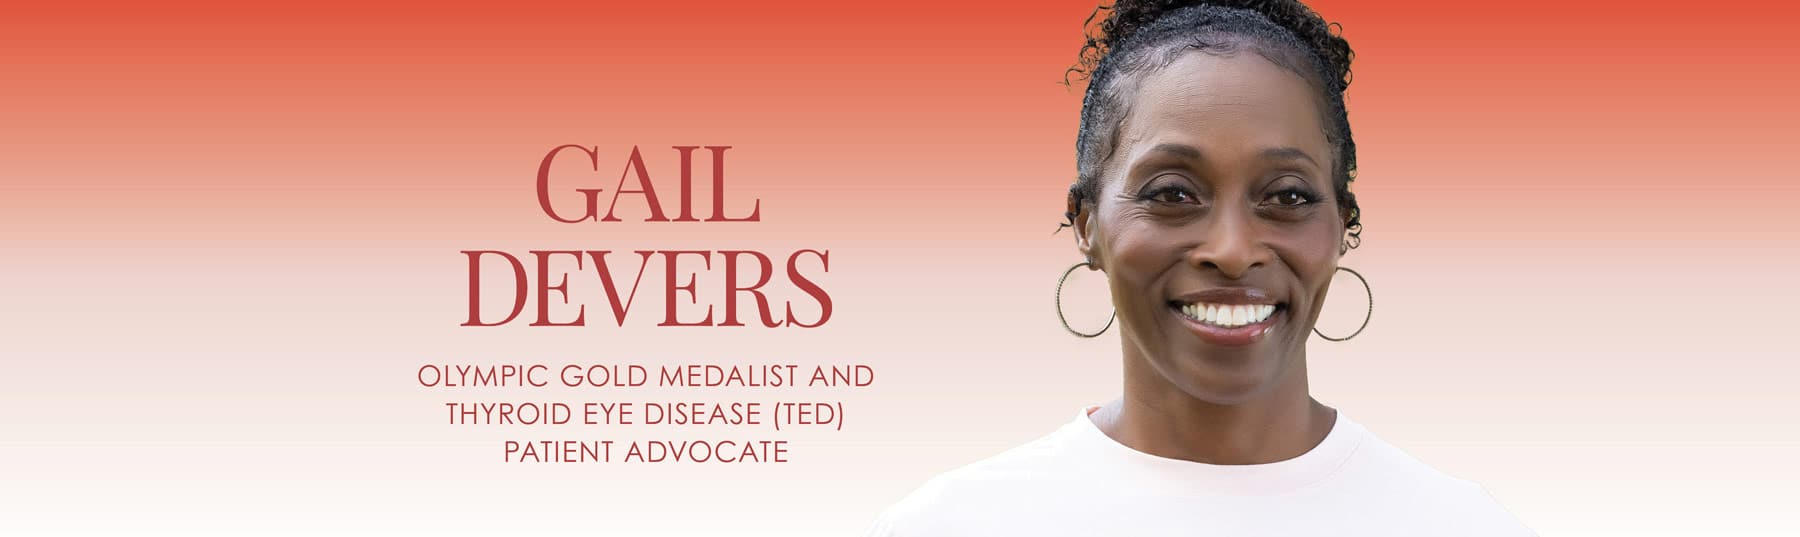 Join Gail Devers, Olympic Gold Medalist and Thyroid Eye Disease (TED) Patient Advocate at the TX Conference for Women on Nov. 16th!